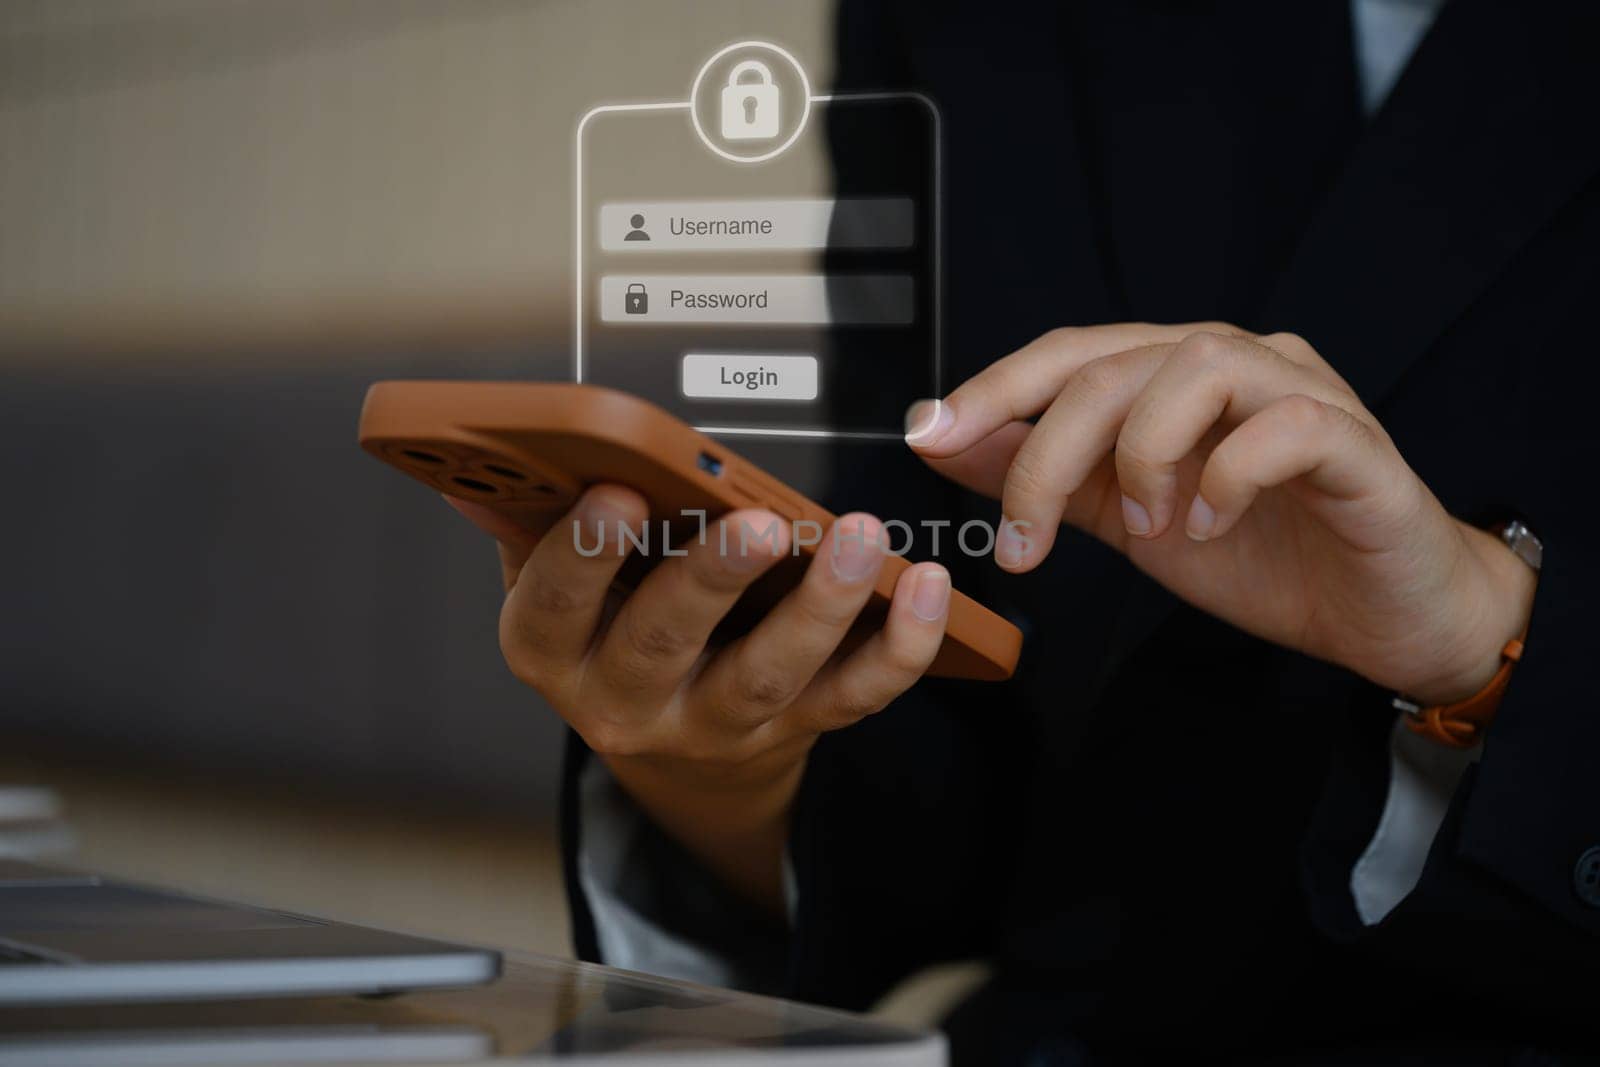 Woman login with smartphone, entering username and password for safety internet security access.